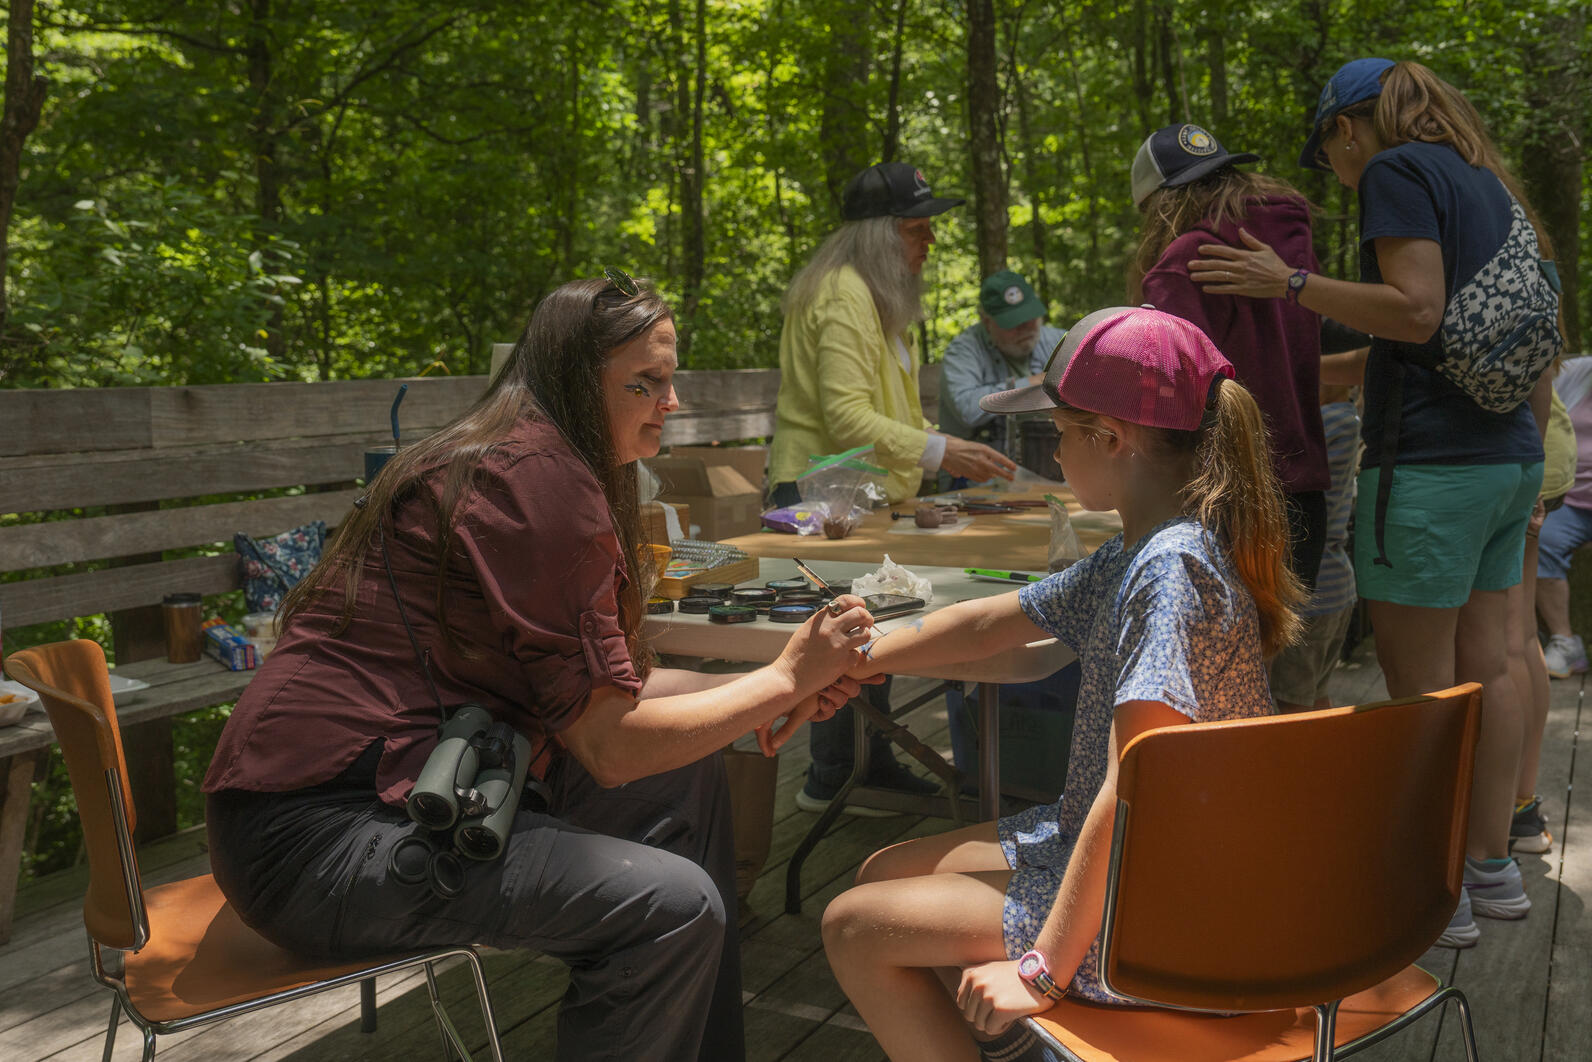 An Audubon staff person sits at a table on the backporch of the visitor center and paints on a girl's arm. Behind them two volunteers share nature objects with guests.